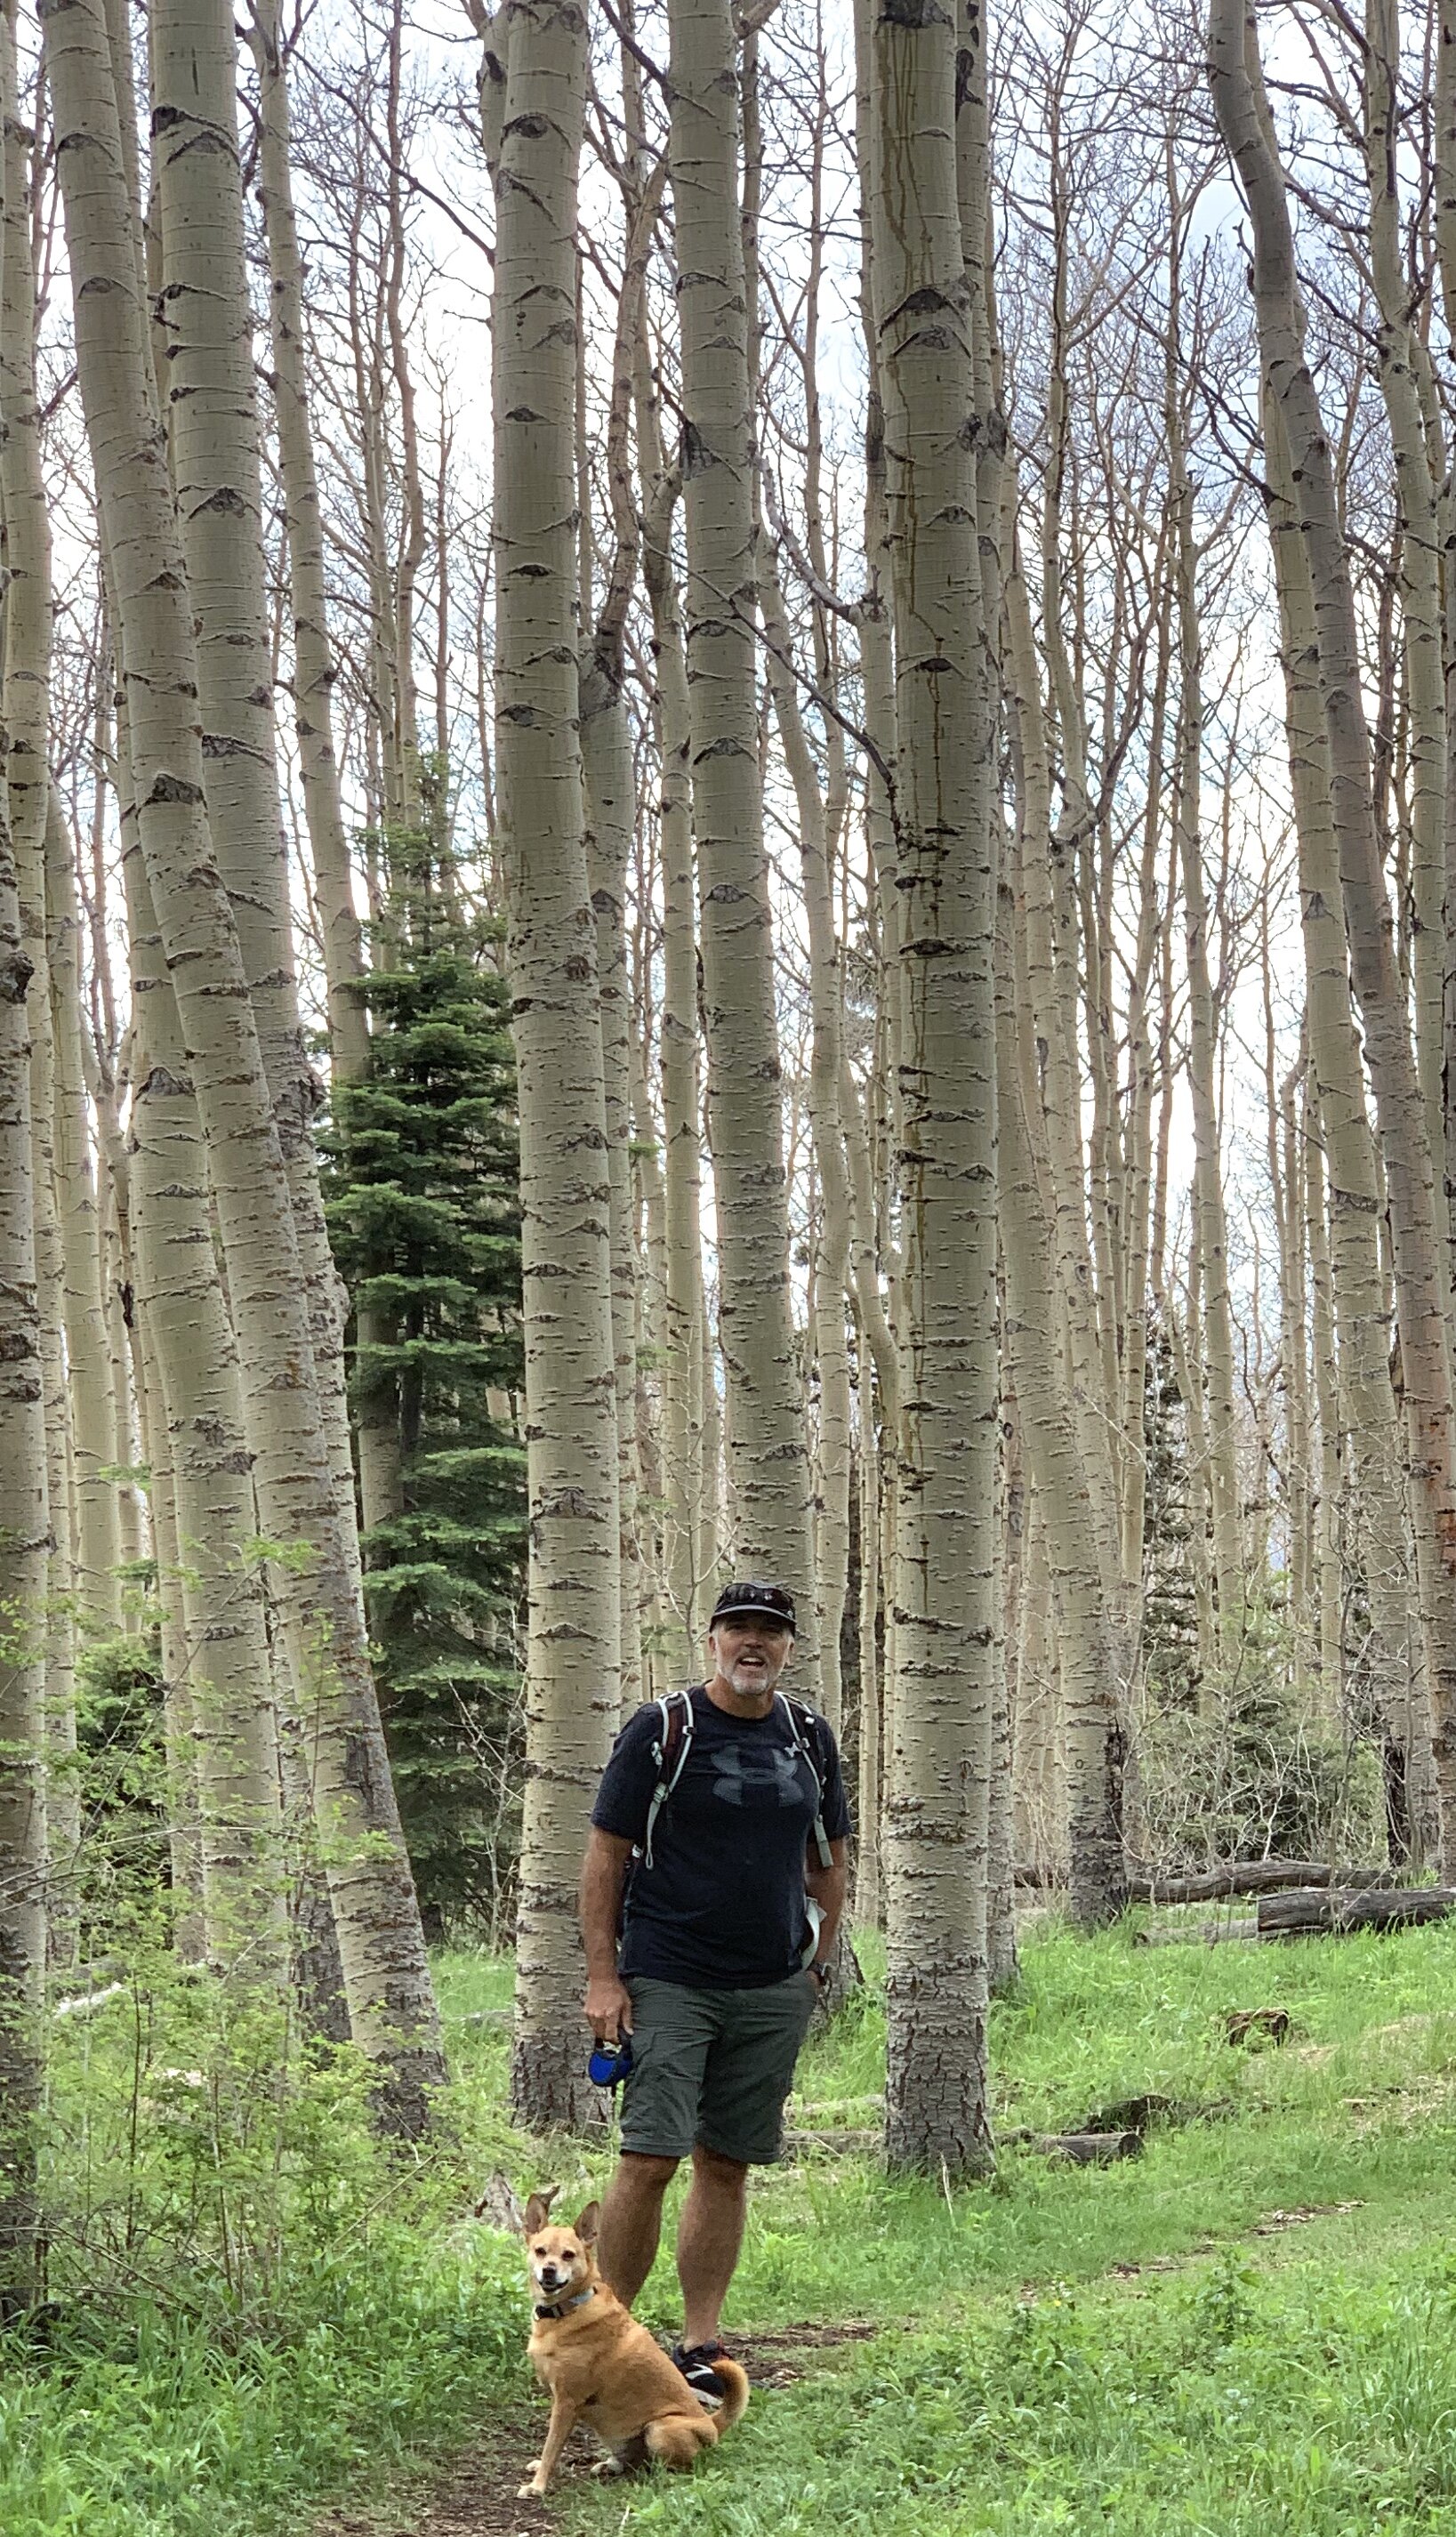  In Santa Fe National Forest, we enjoyed serene walks in beautiful nature. On this day, it rained a few times and we ran for cover from large hail that fell on us several times during this hike. 